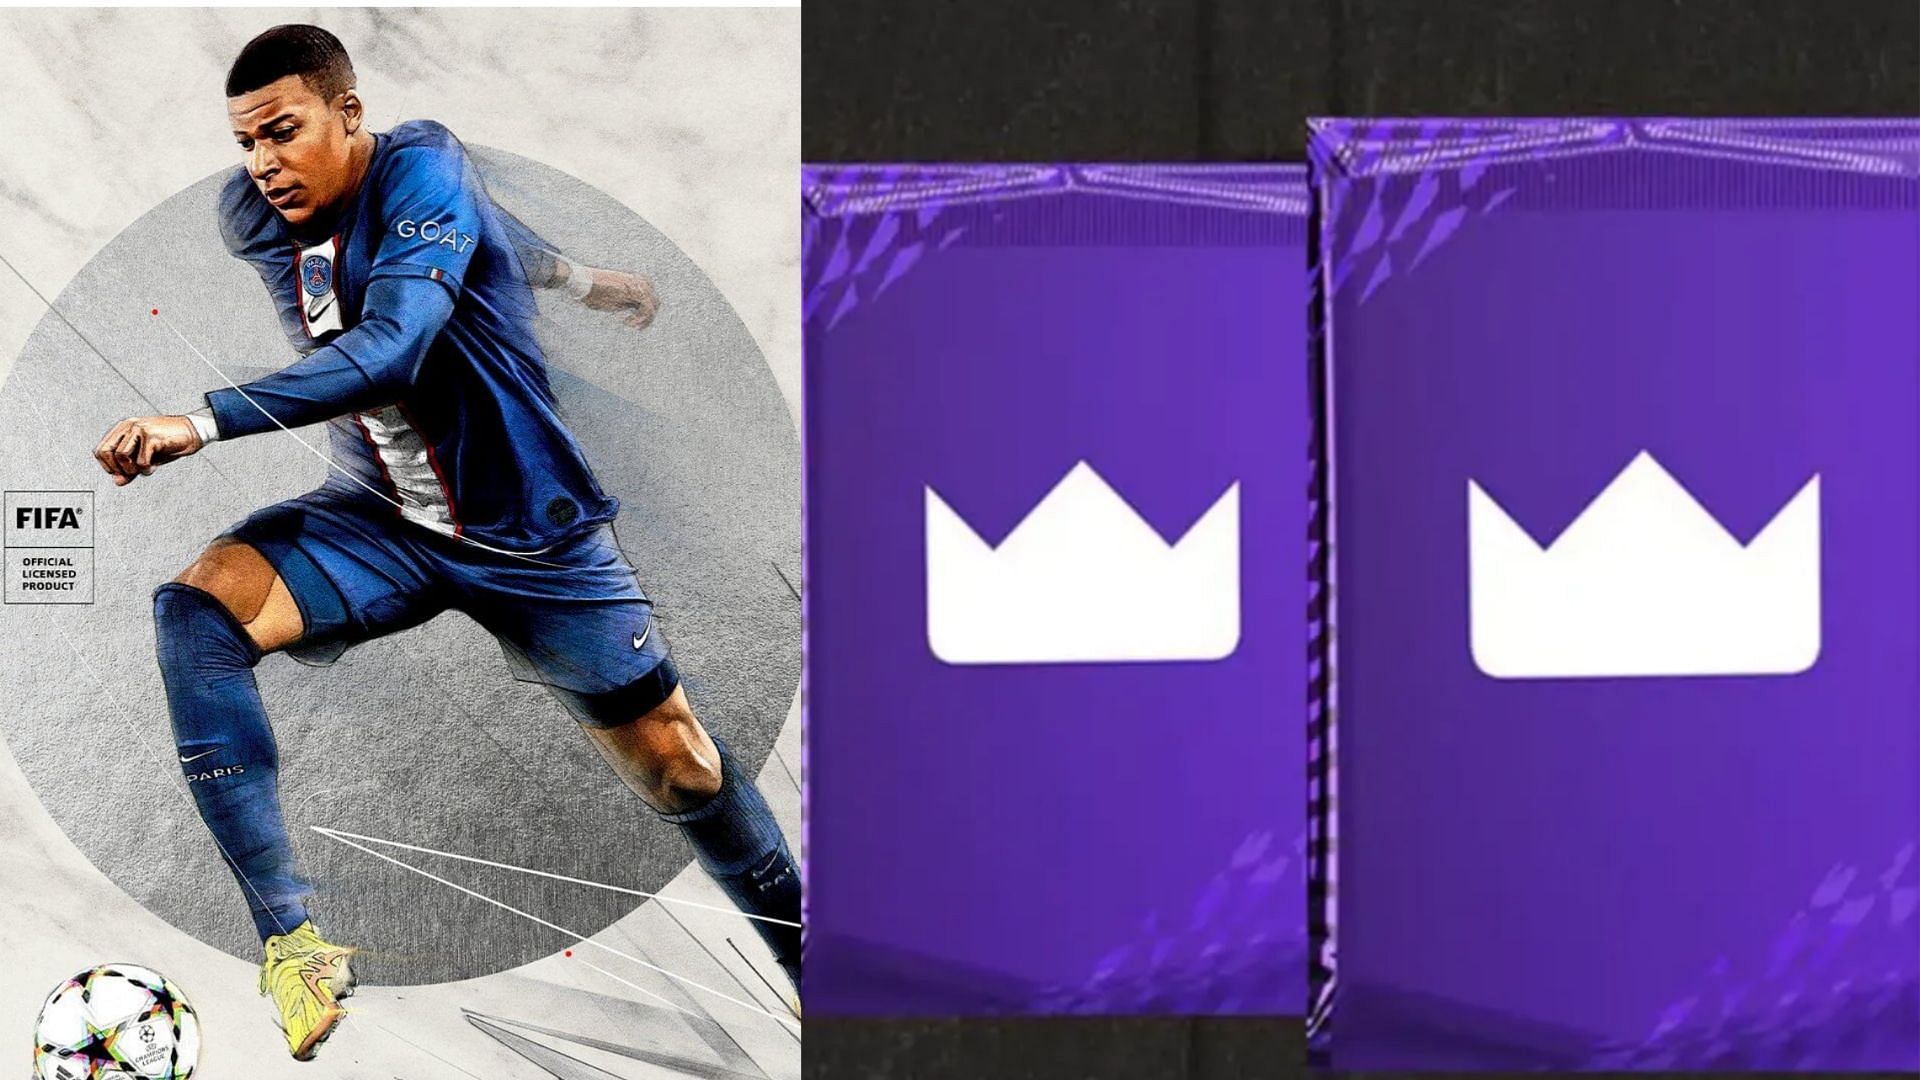 A new Prime Gaming Pack is now available (Images via EA Sports)